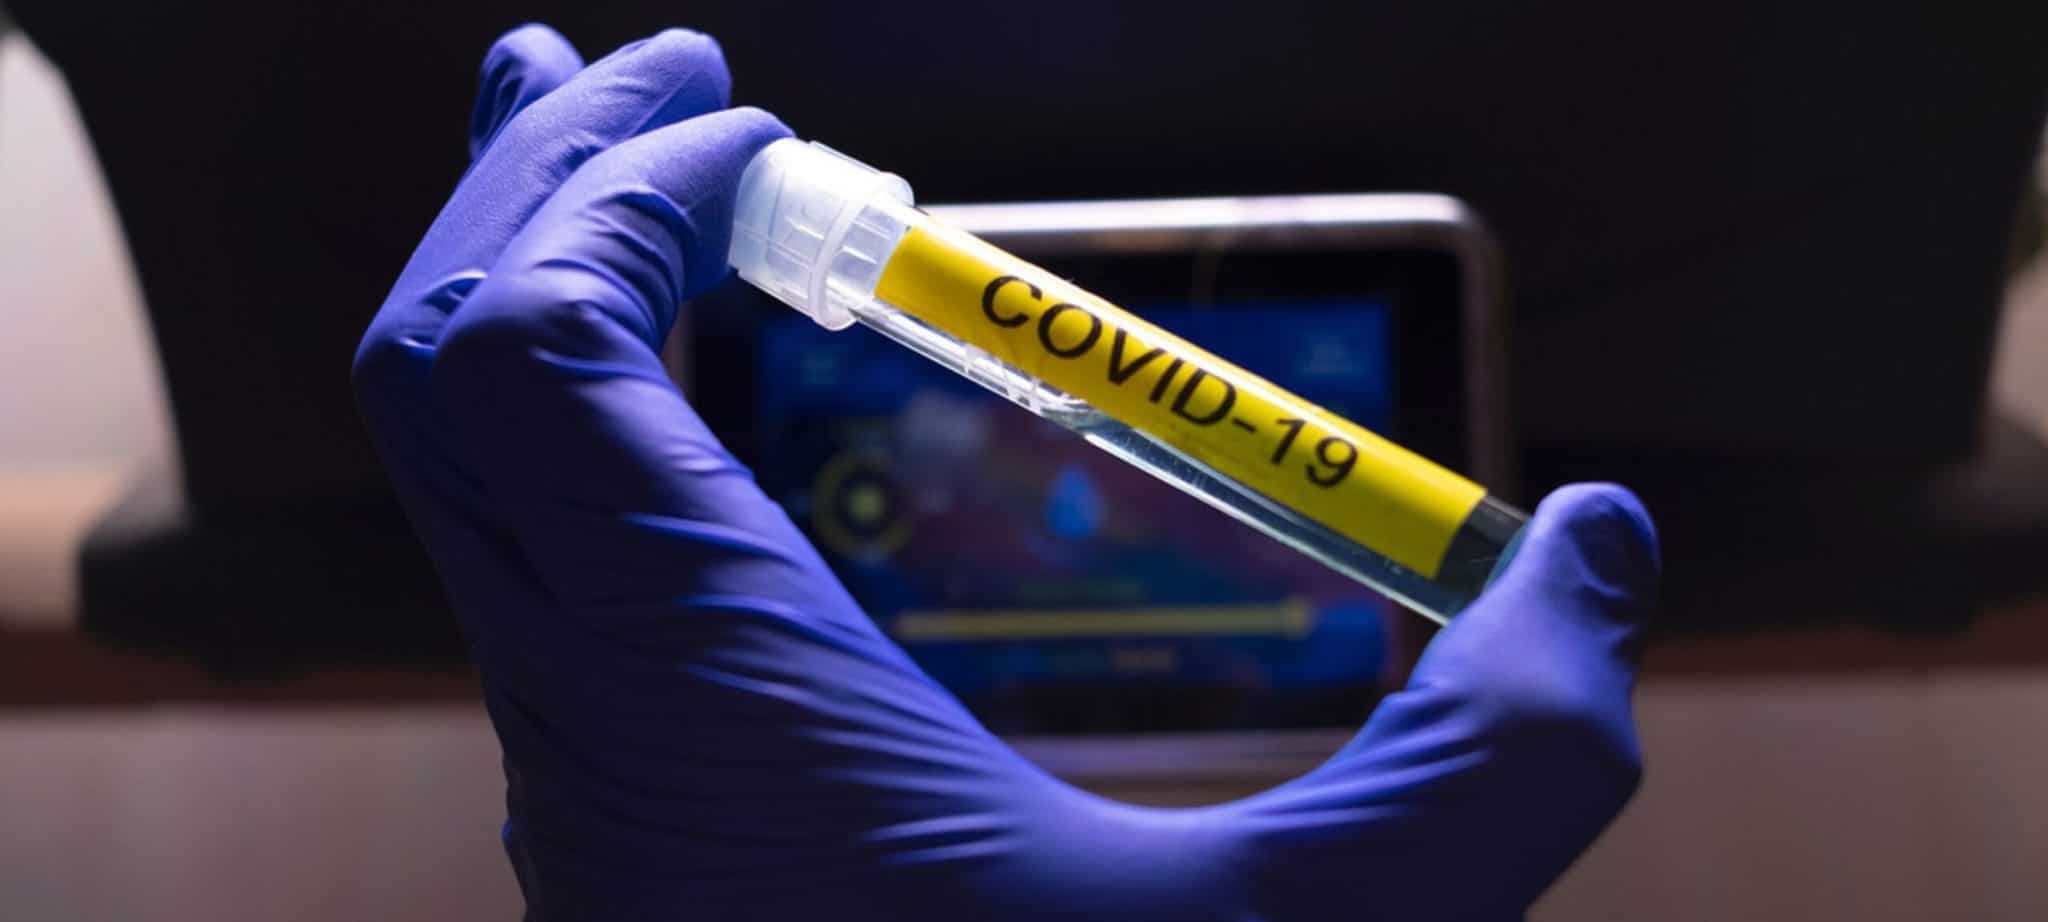 Coronavirus: how many people die per day in the world